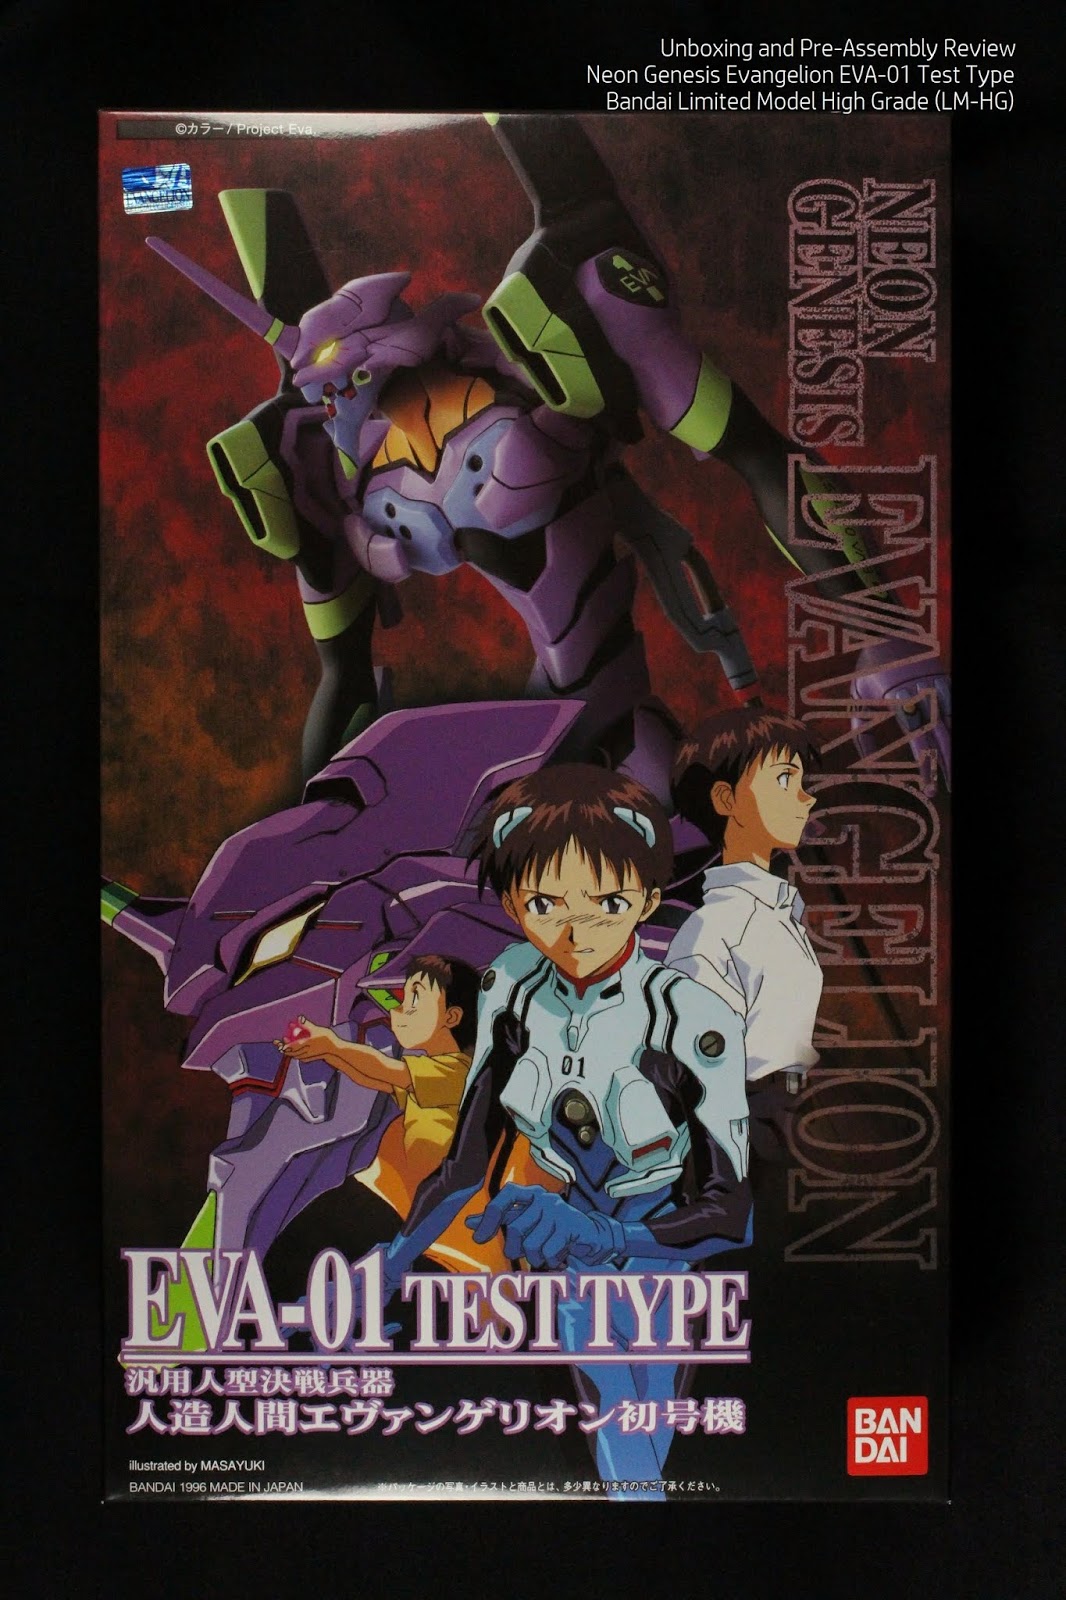 Art and Musings of a Miniature Hobbyist: Bandai LM-HG Neon Genesis Evangelion  EVA 01 Test Type [Unboxing and Pre-Assembly Review]